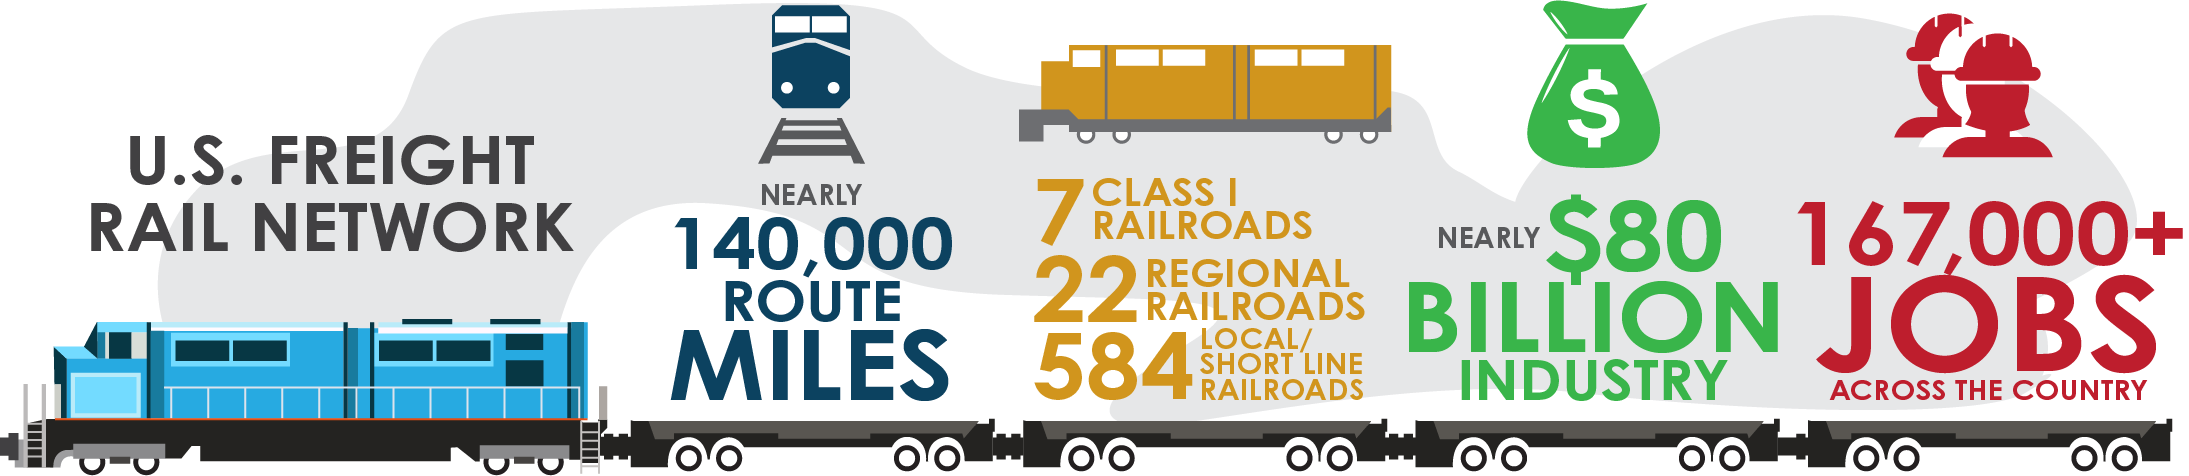 Freight Rail Infographic